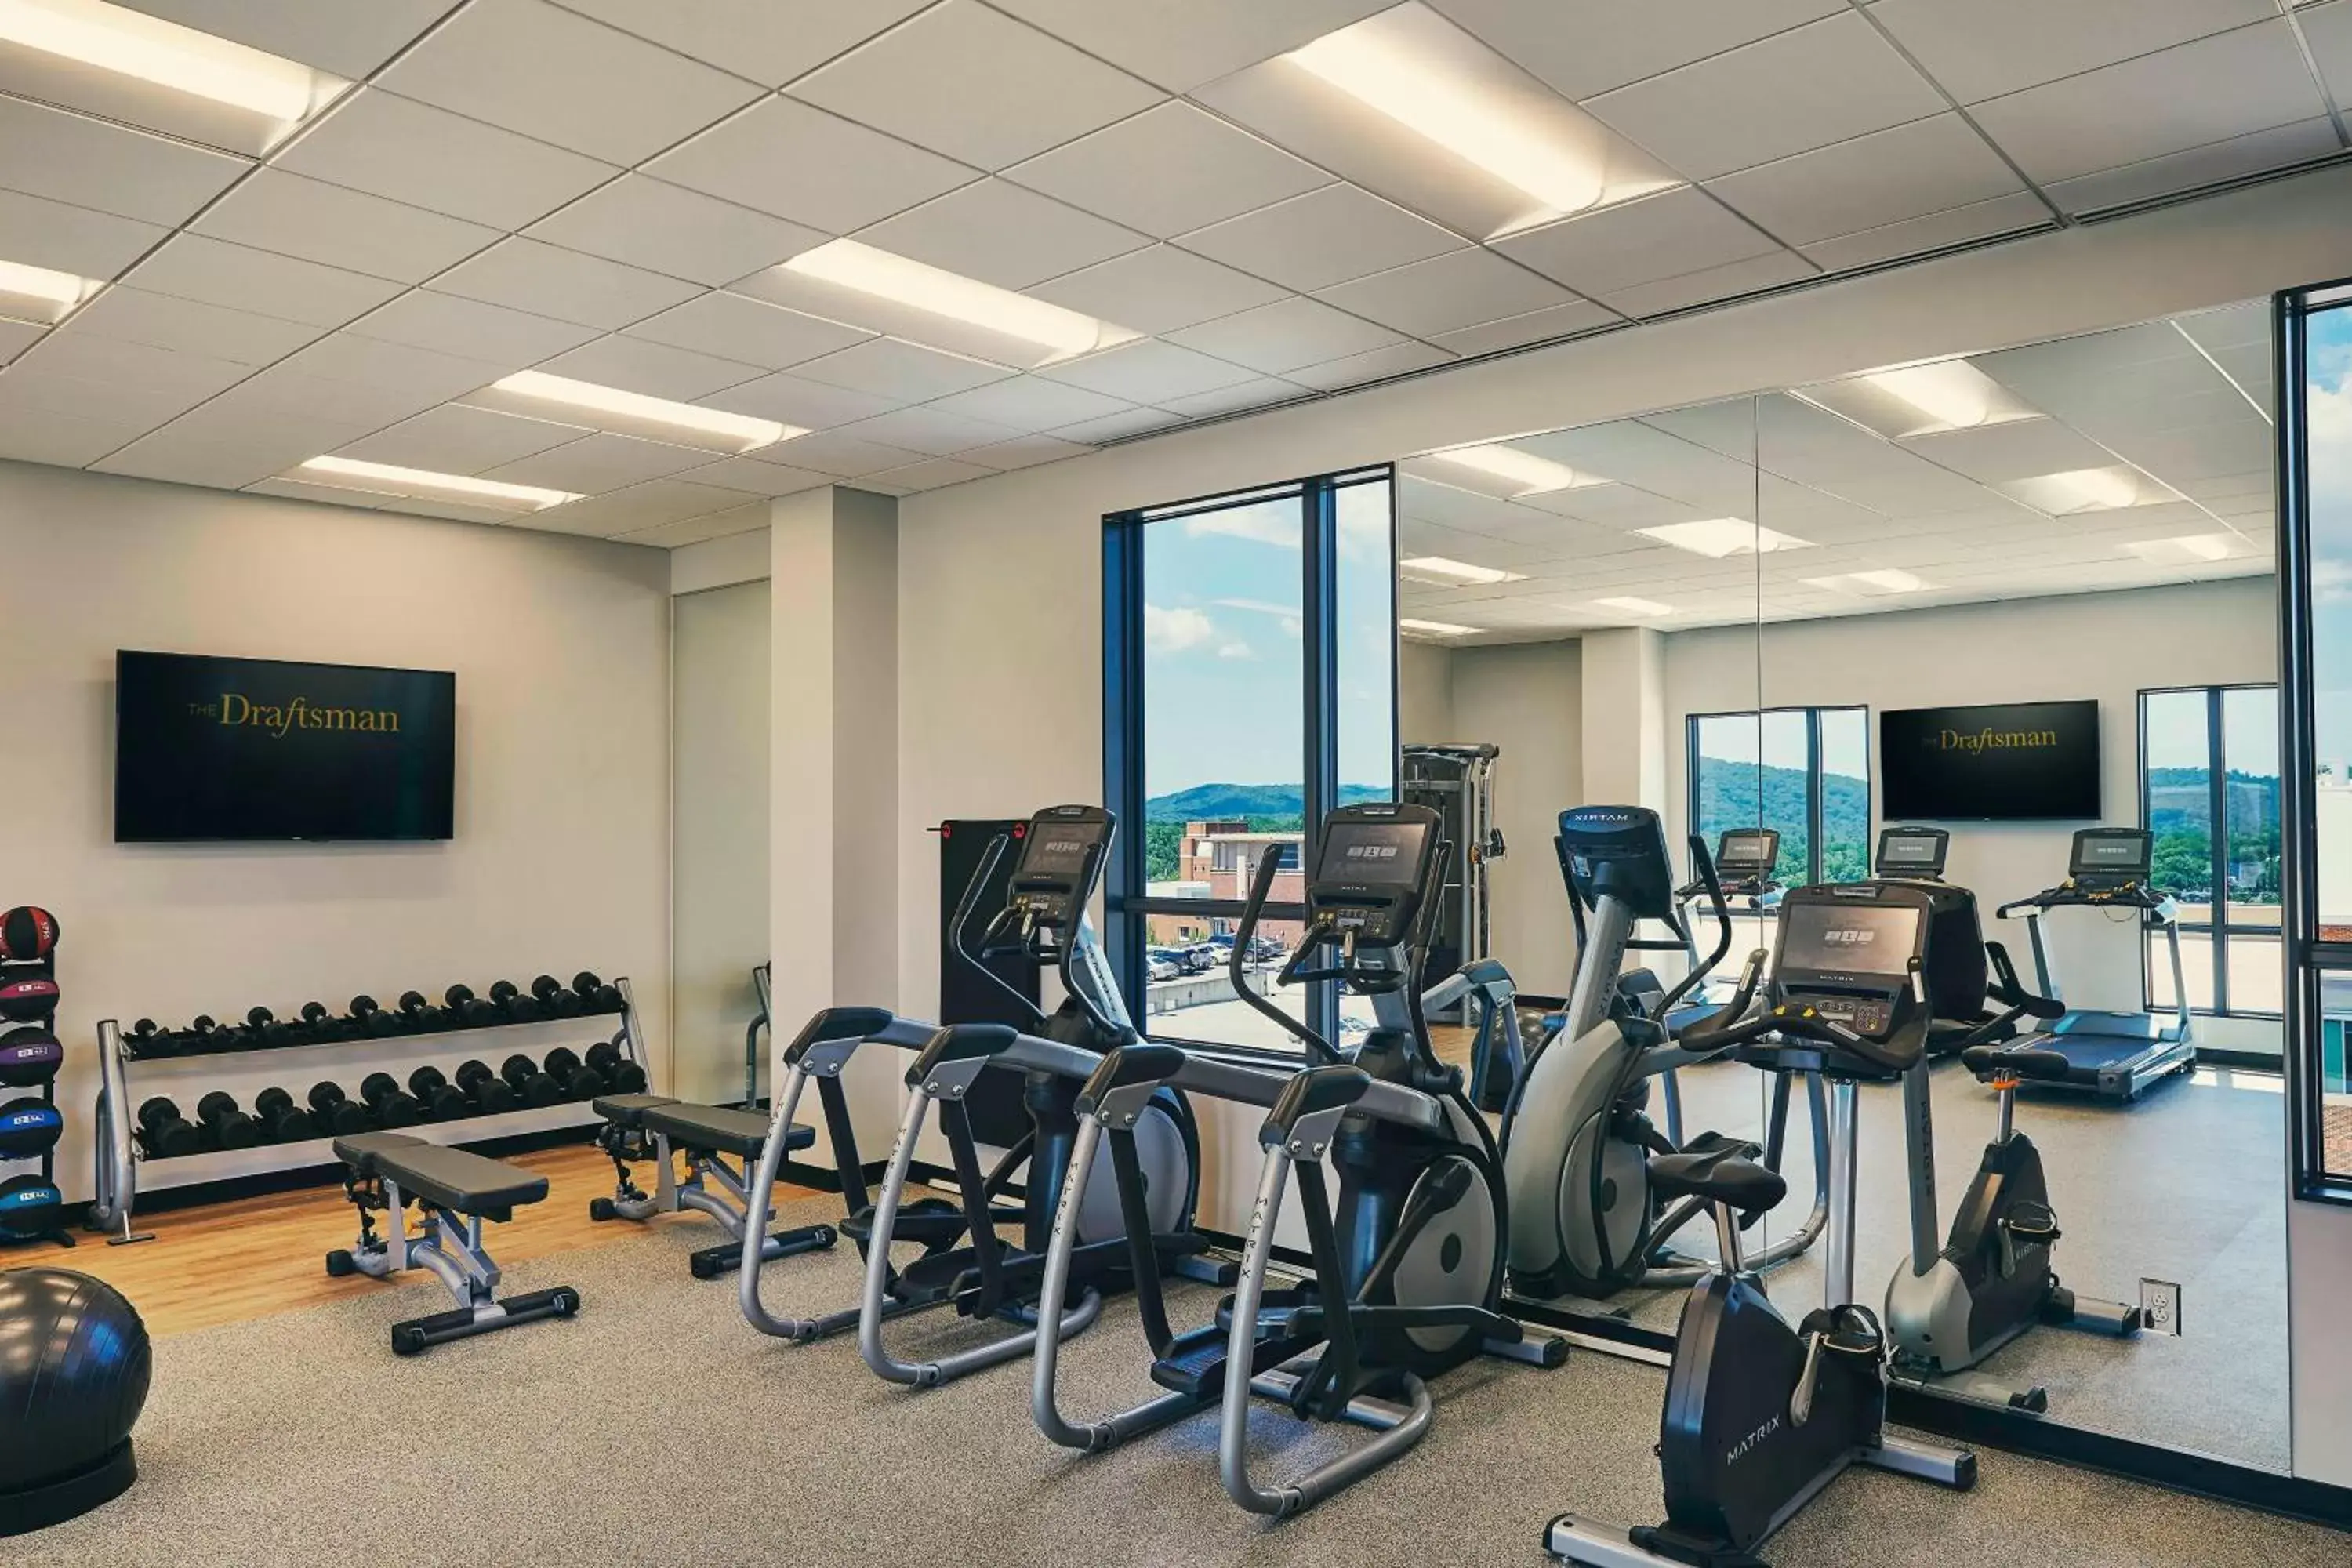 Fitness centre/facilities, Fitness Center/Facilities in The Draftsman, Autograph Collection